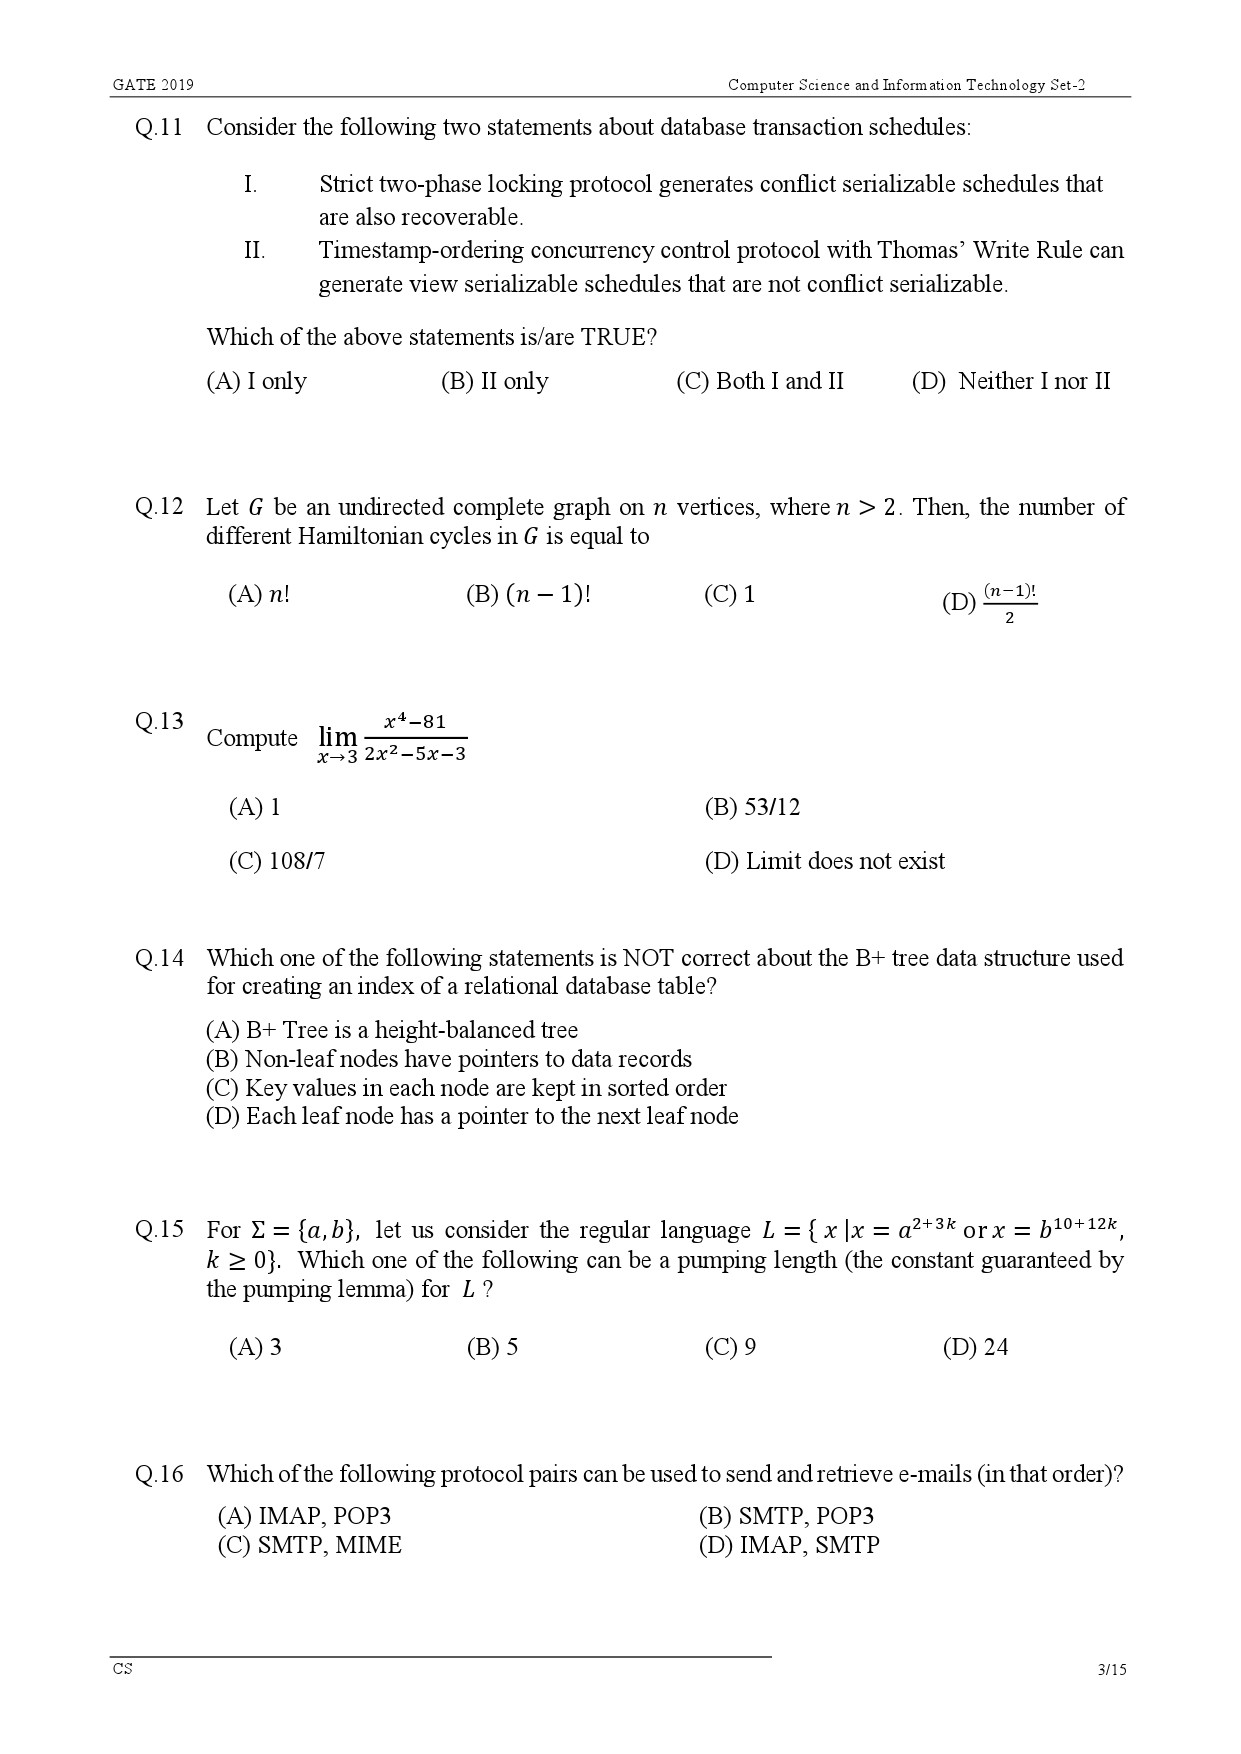 GATE Exam Question Paper 2019 Computer Science and Information Technology 6